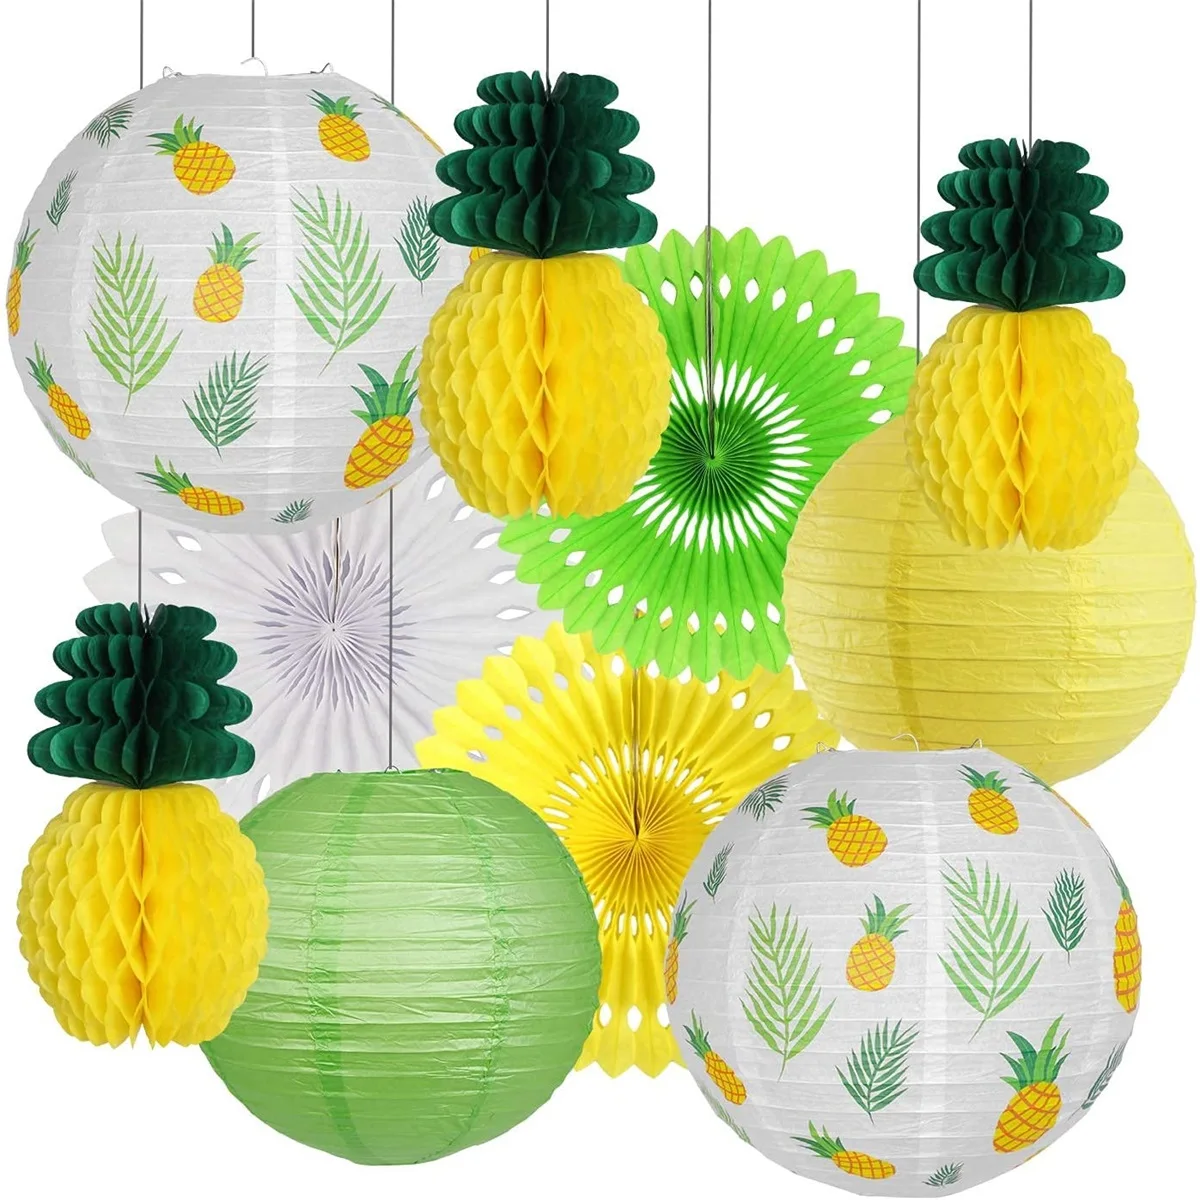 

10Pcs DIY Party Decoratives Tropical Leaves Hanging Lanterns Pineapple Honeycomb Balls Tissue Paper Fan Hawaiian Party Supplies